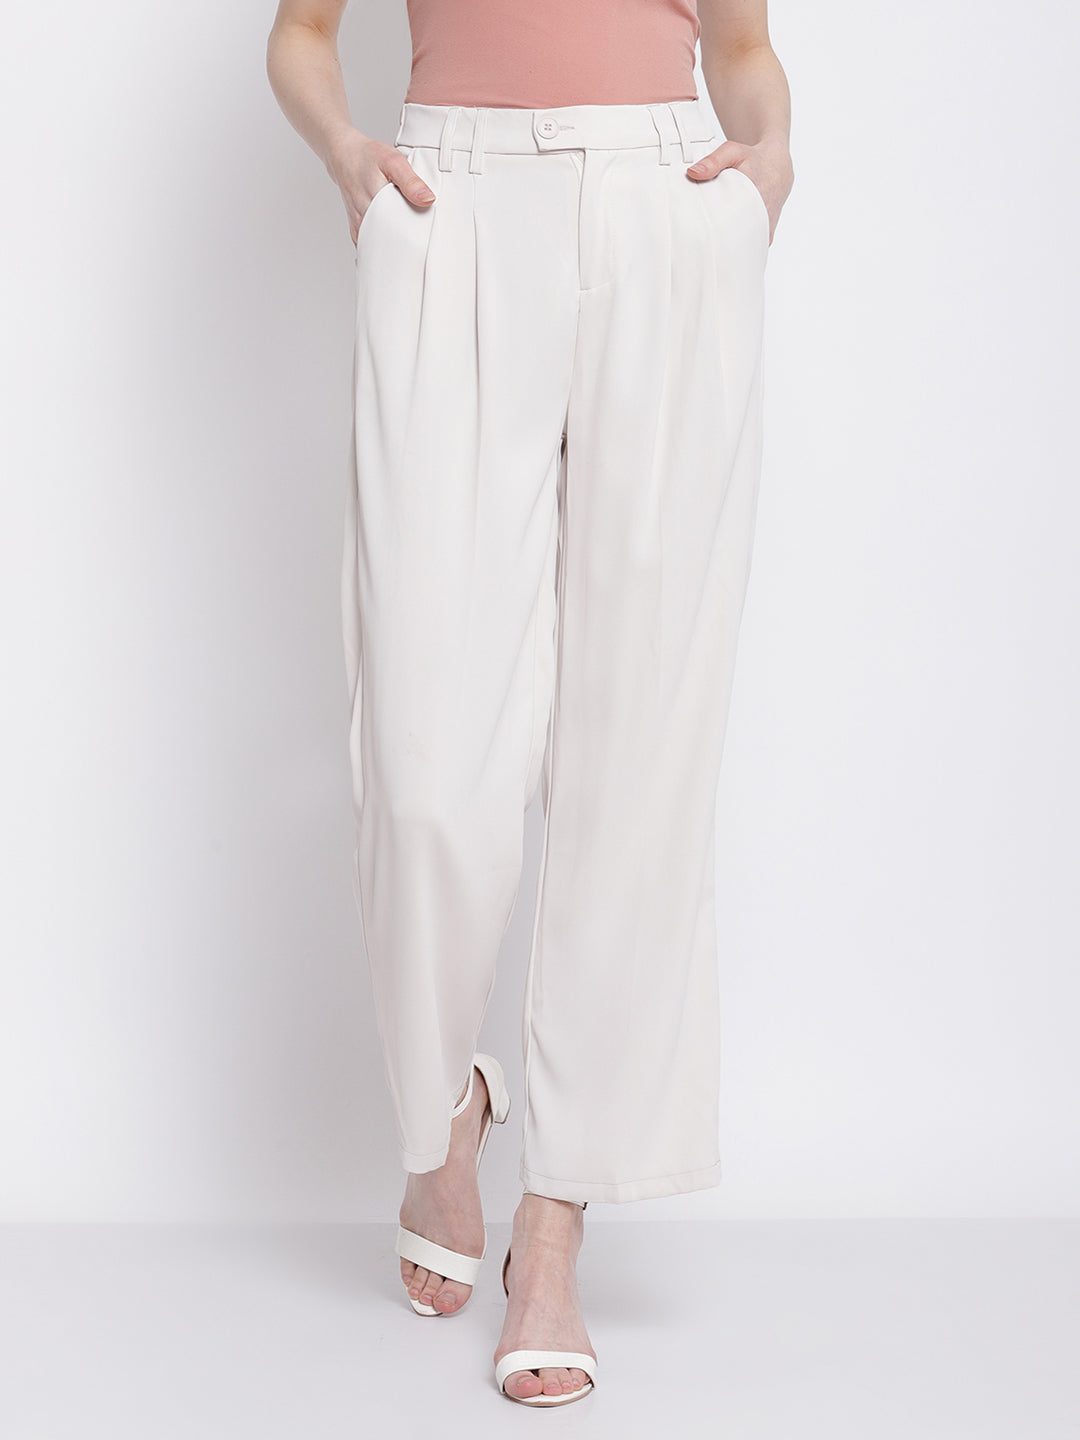 Women Relaxed-Fit Solid Beige Trouser Pants